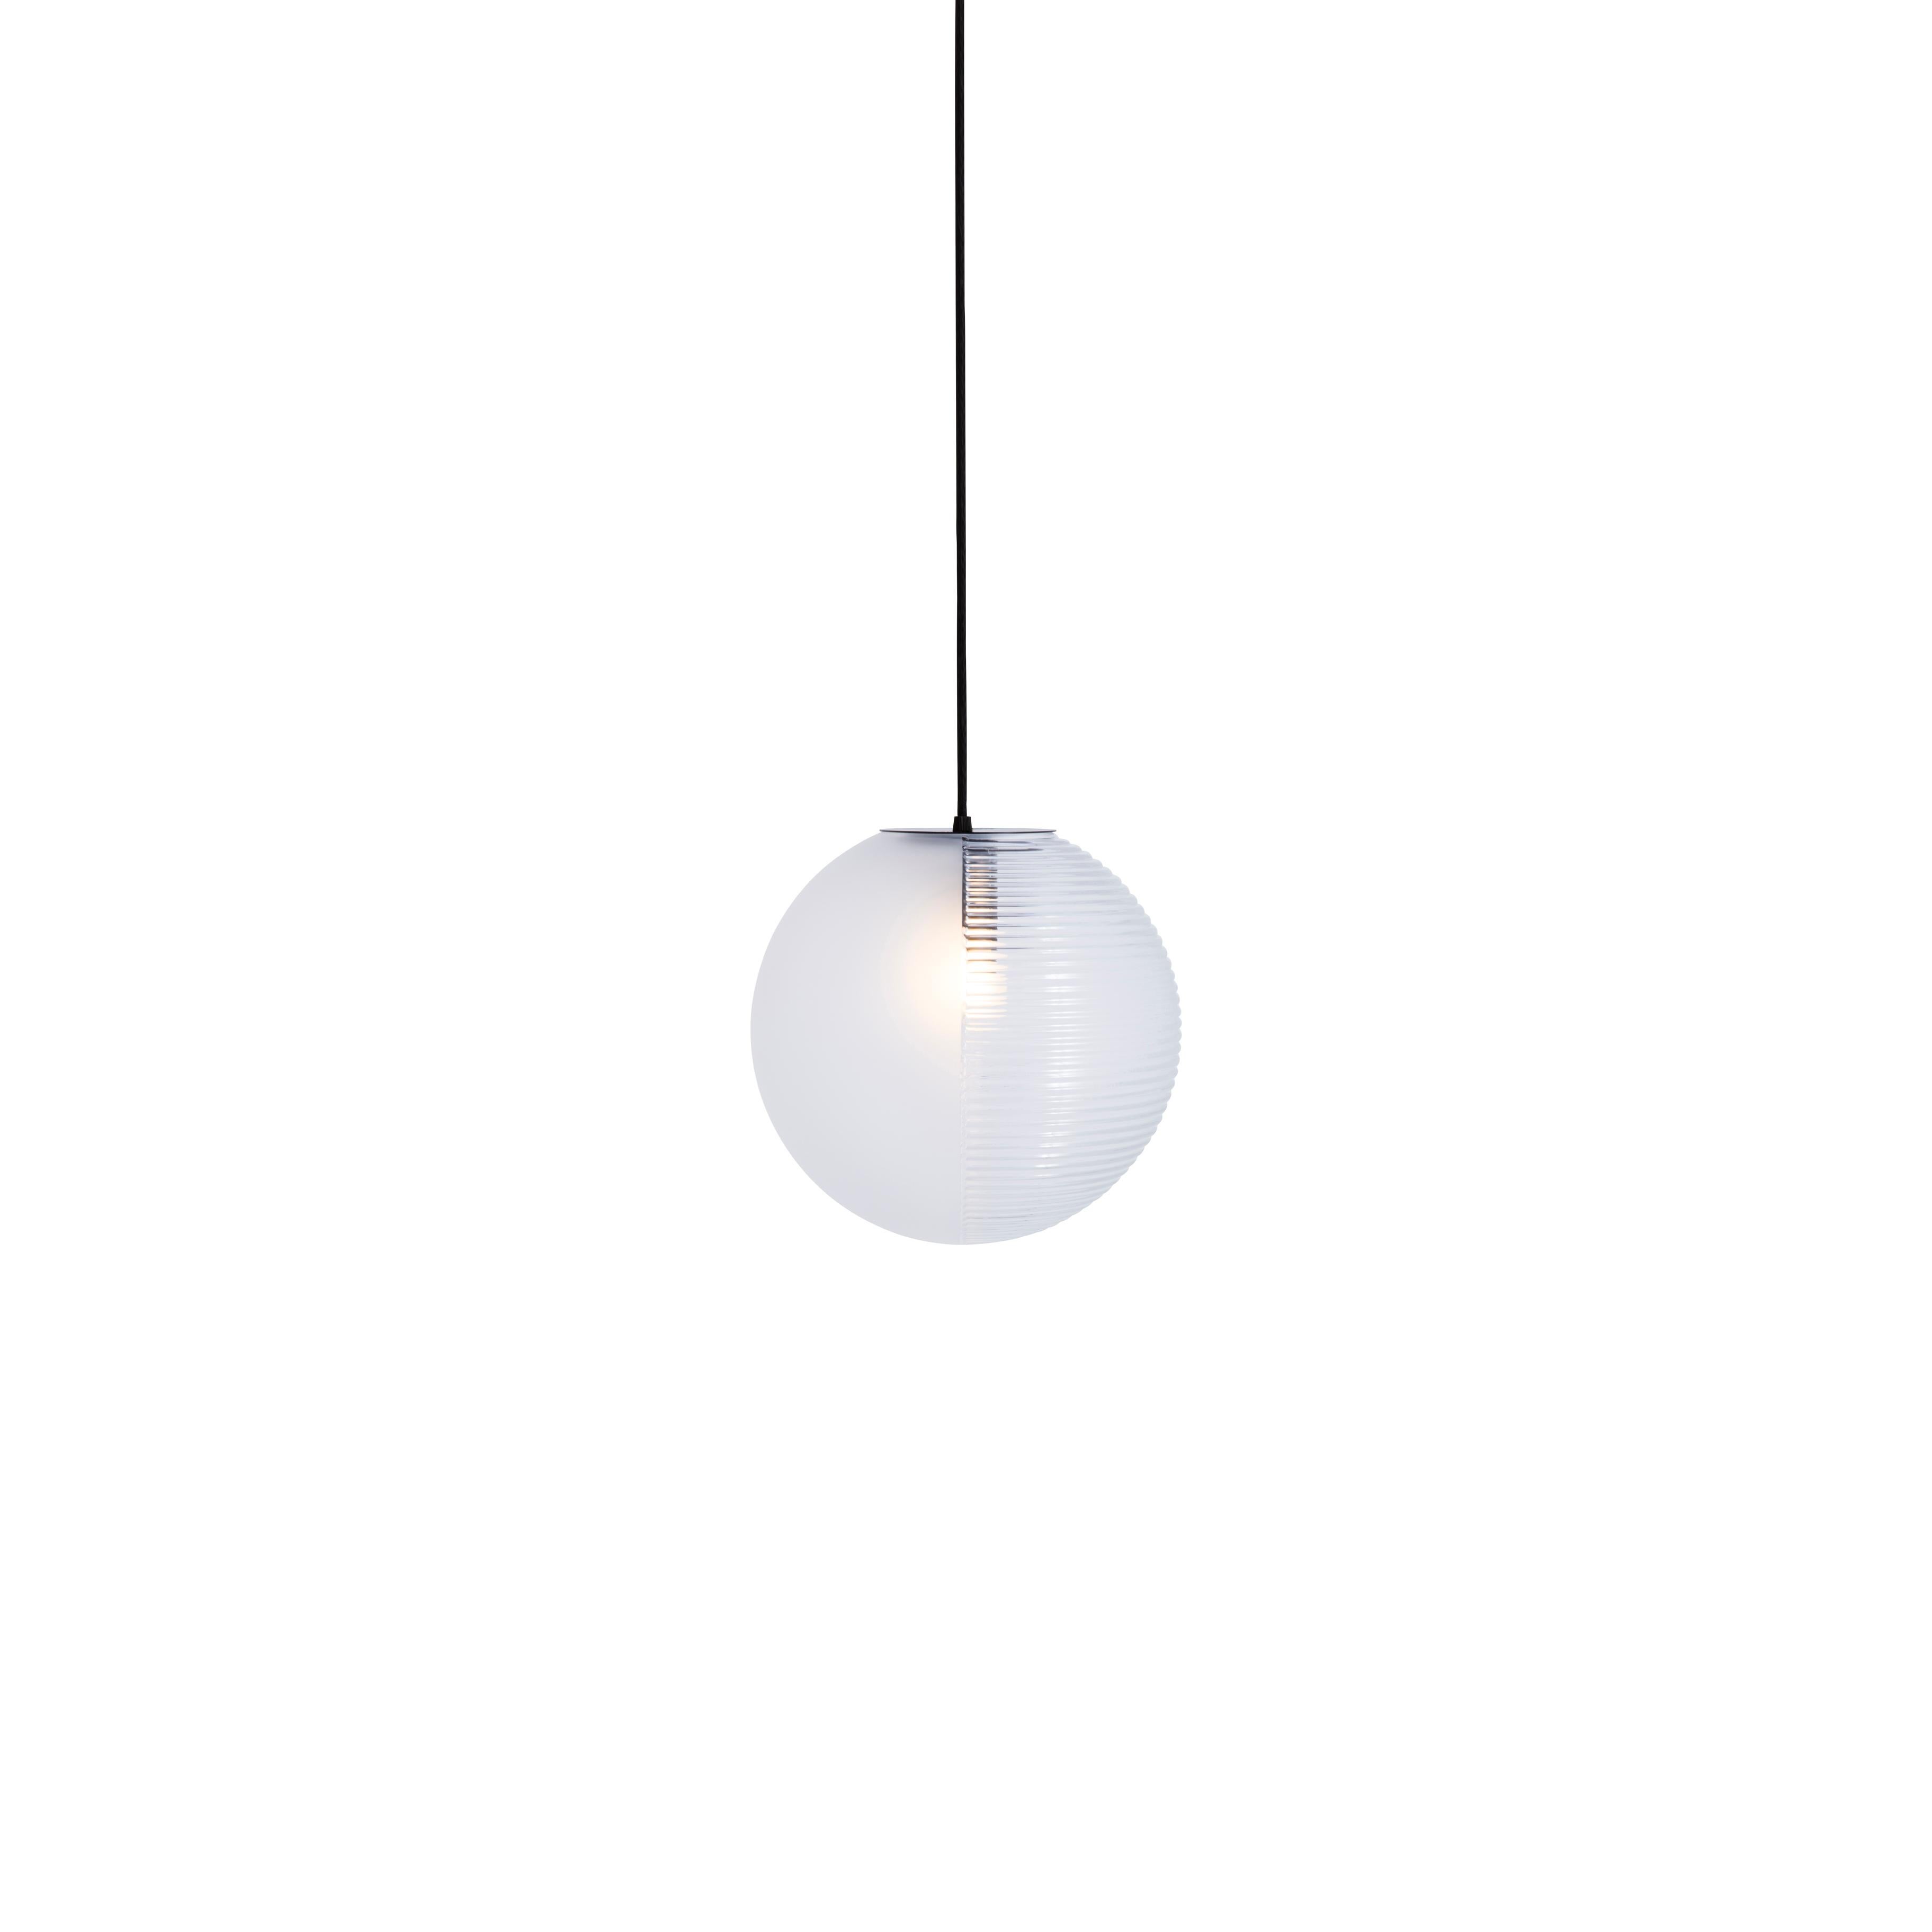 Stellar mini transparent acetato pendant by Pulpo.
Dimensions: D18 x H320 cm.
Materials: handblown glass coloured, stainless steel wire, textile cable.

Also available in different finishes: aubergine acetato aubergine, smoky grey acetato smoky